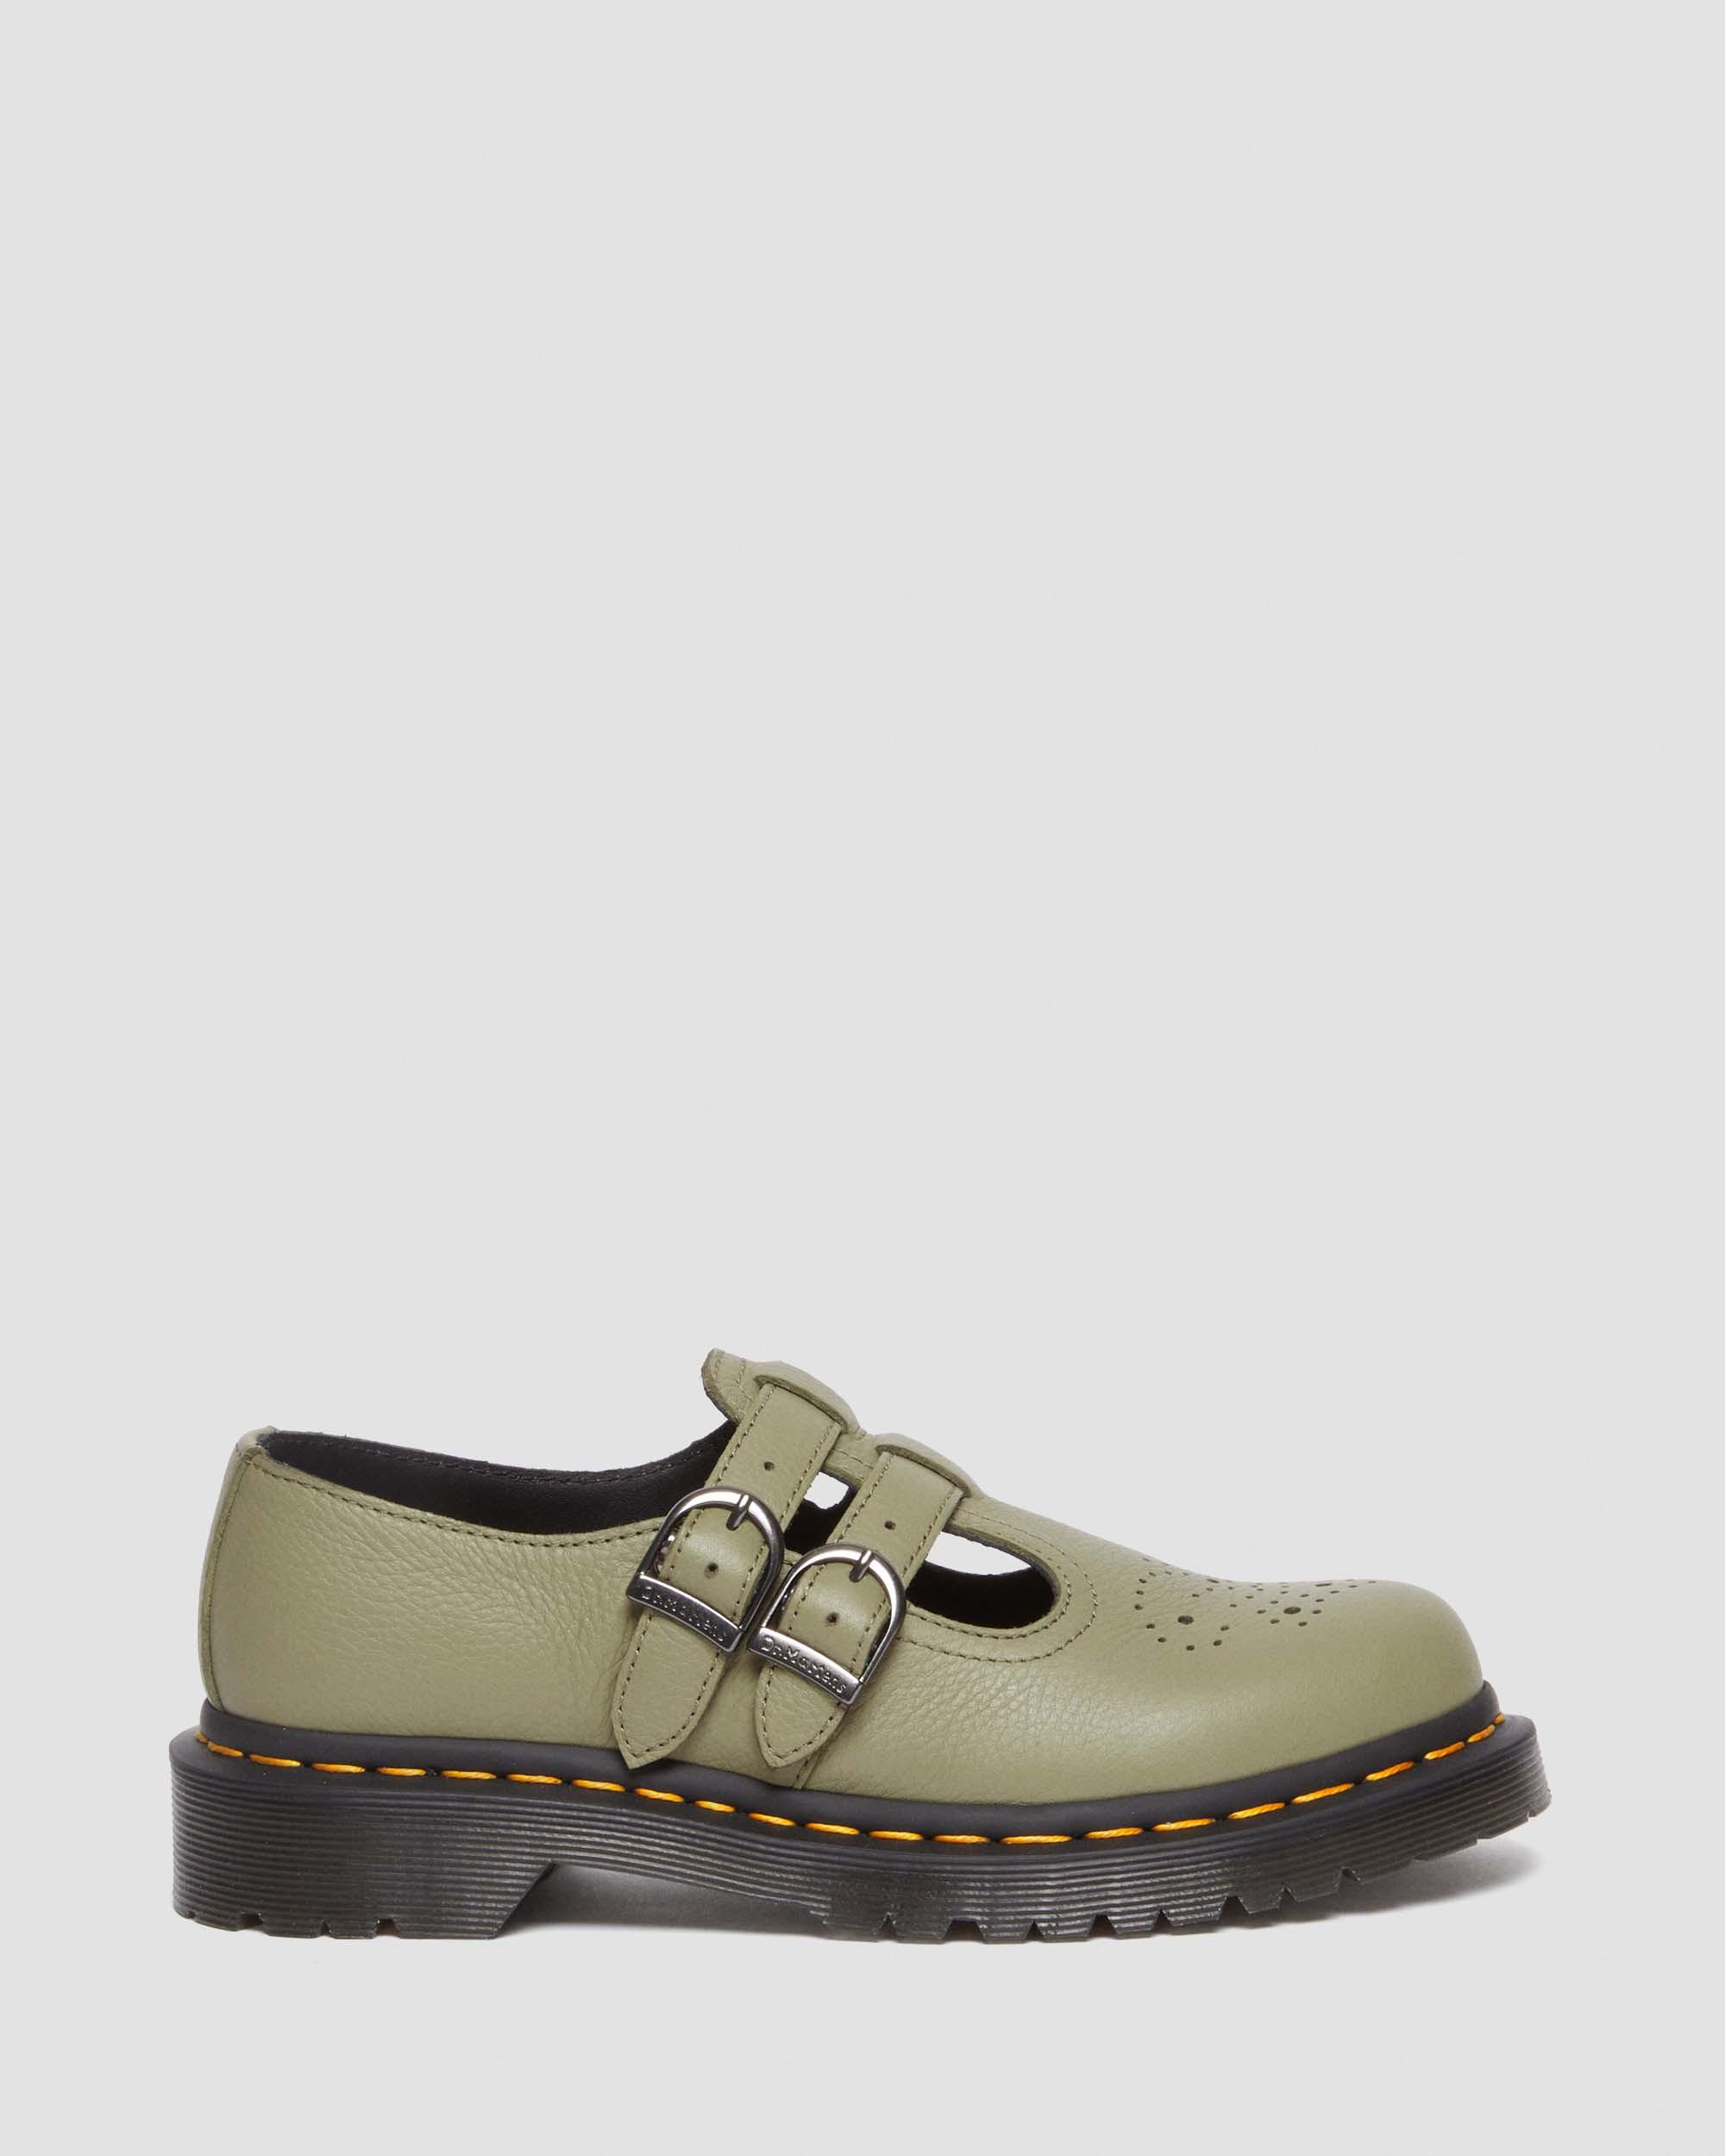 8065 Mary Jane Virginia Leather Shoes in Muted Olive